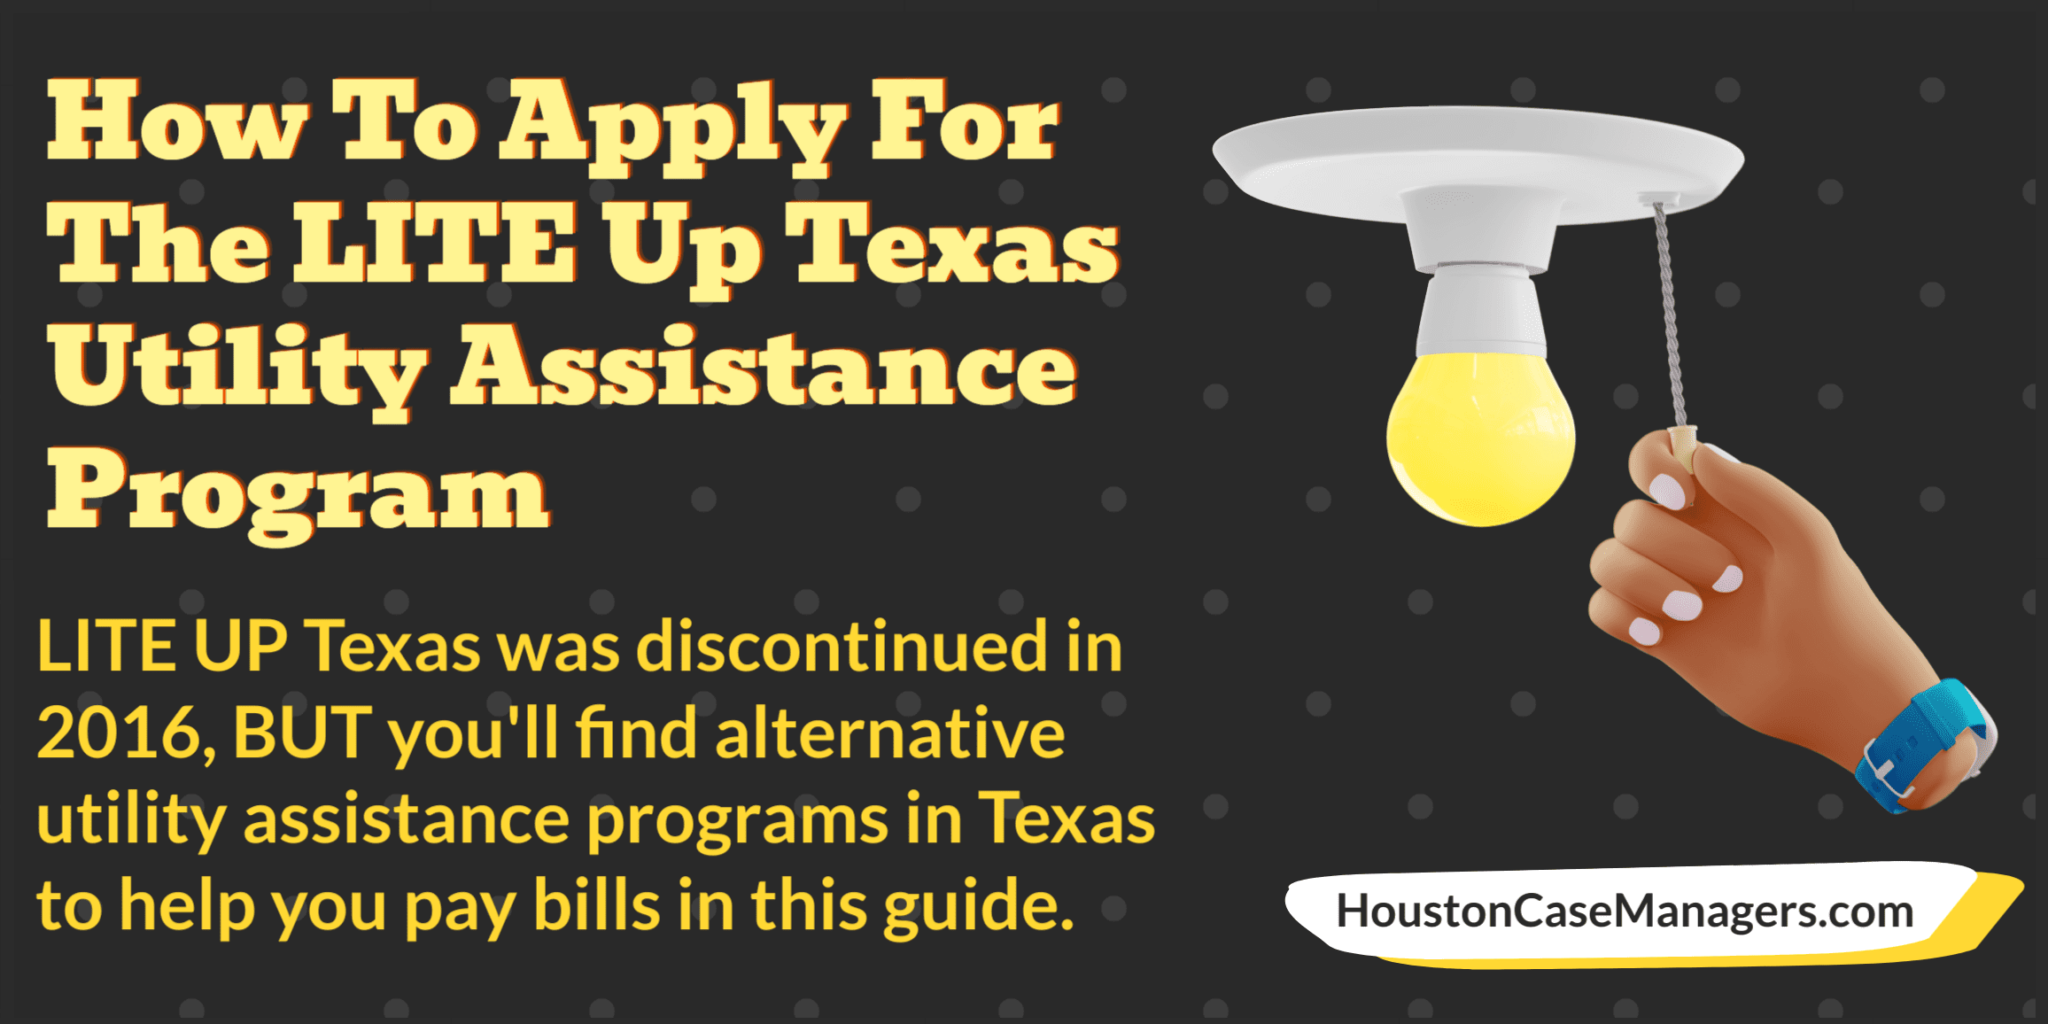 How To Apply For The LITE Up Texas Utility Assistance Program